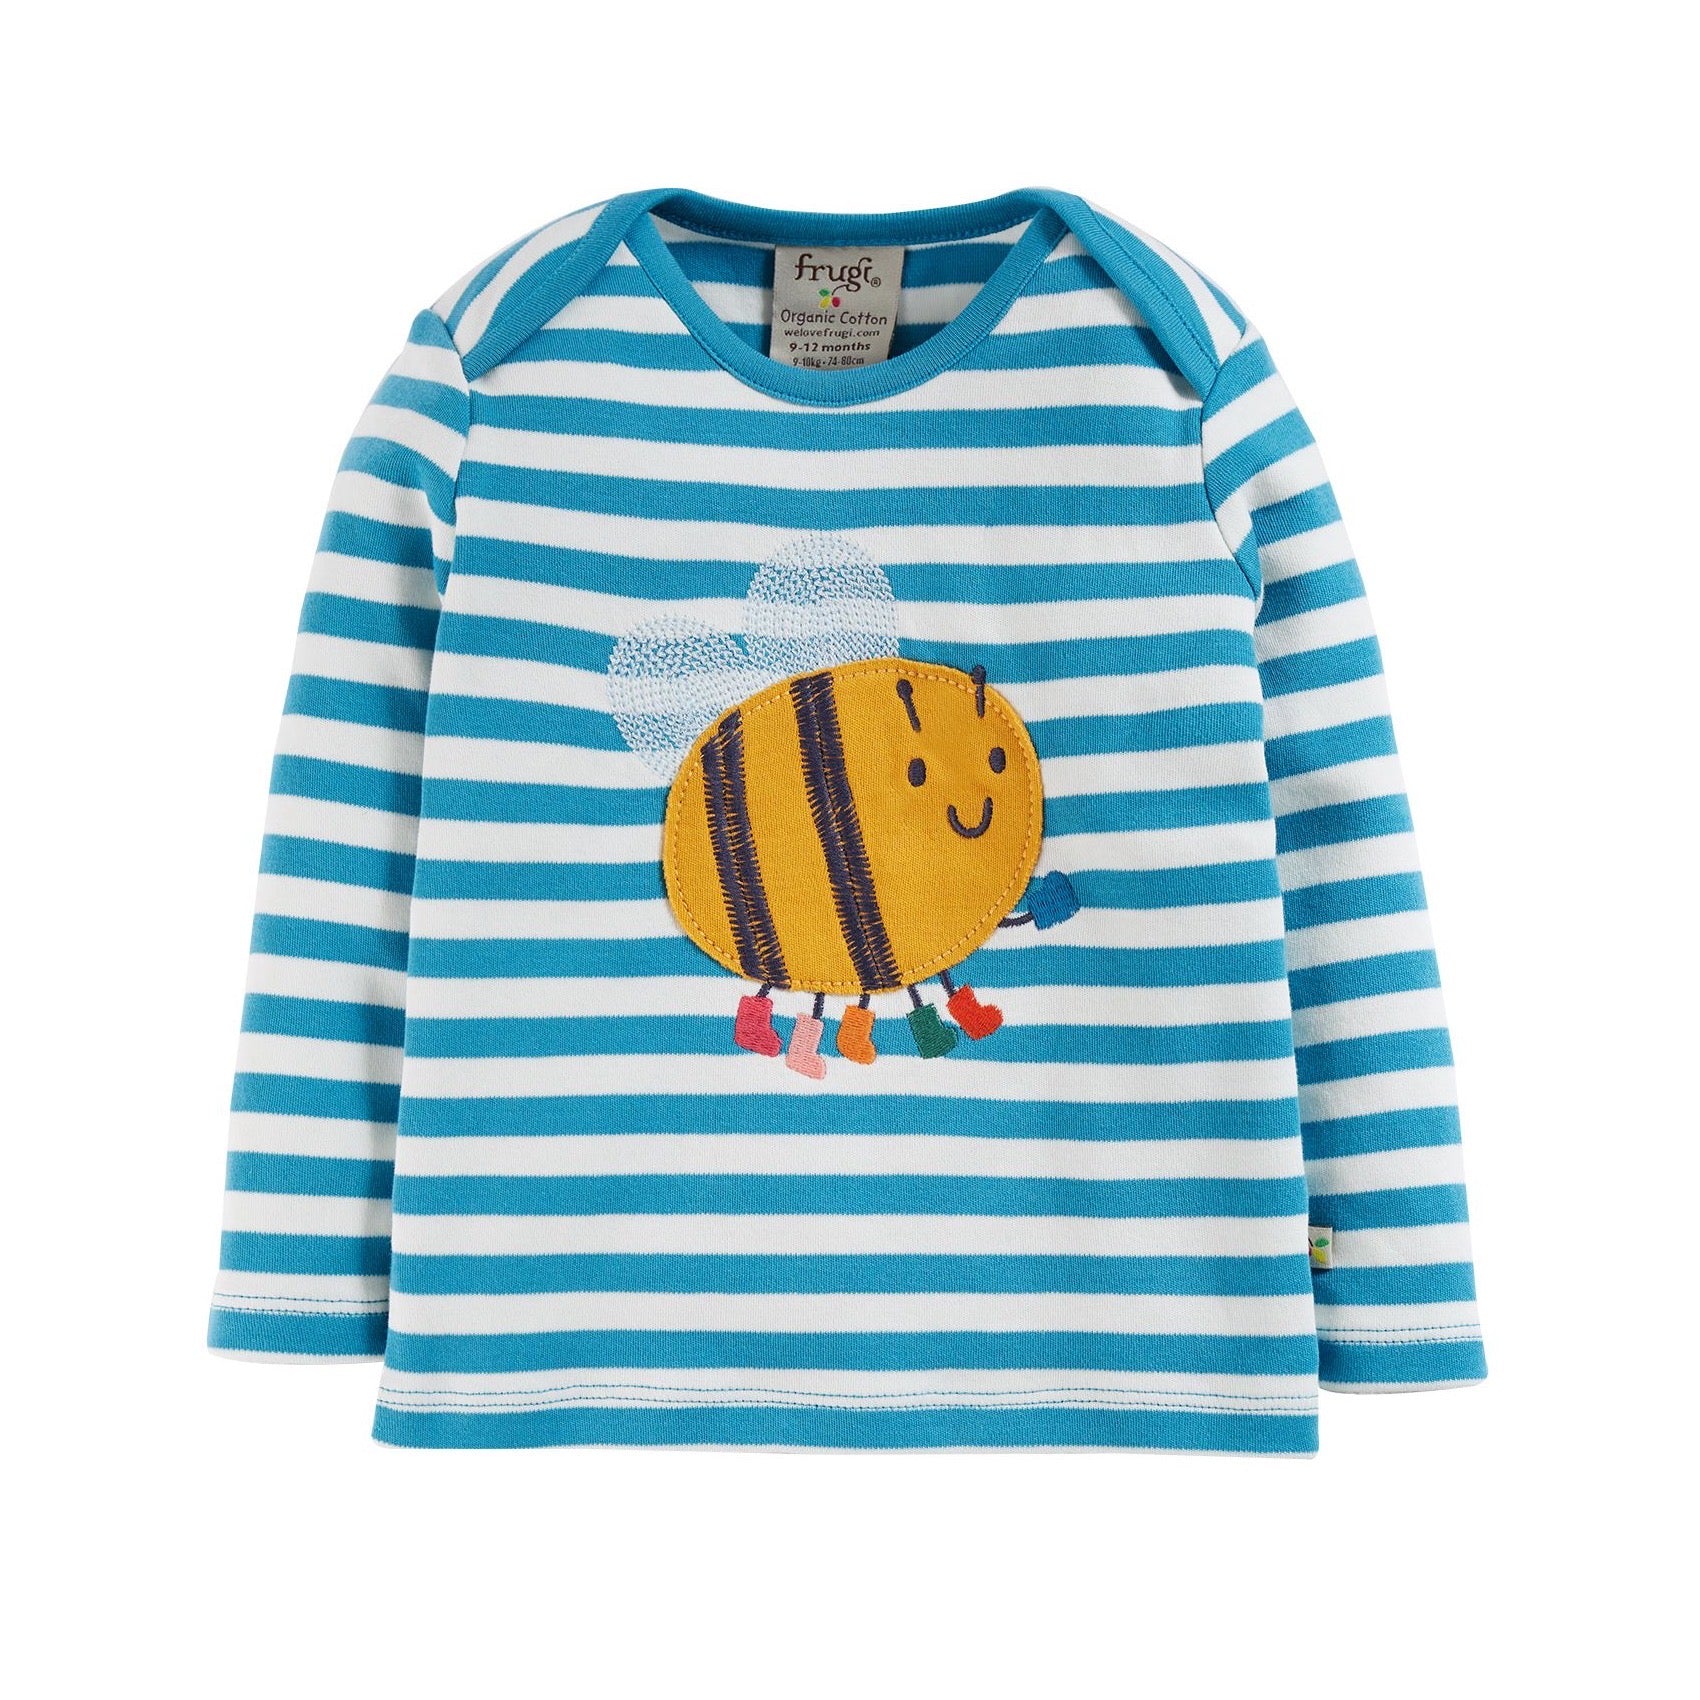 Frugi Bobby Bee Applique Infant Top Clothing 0-3M / Blue,3-6M / Blue,6-9M / Blue,9-12M / Blue,12-18M / Blue